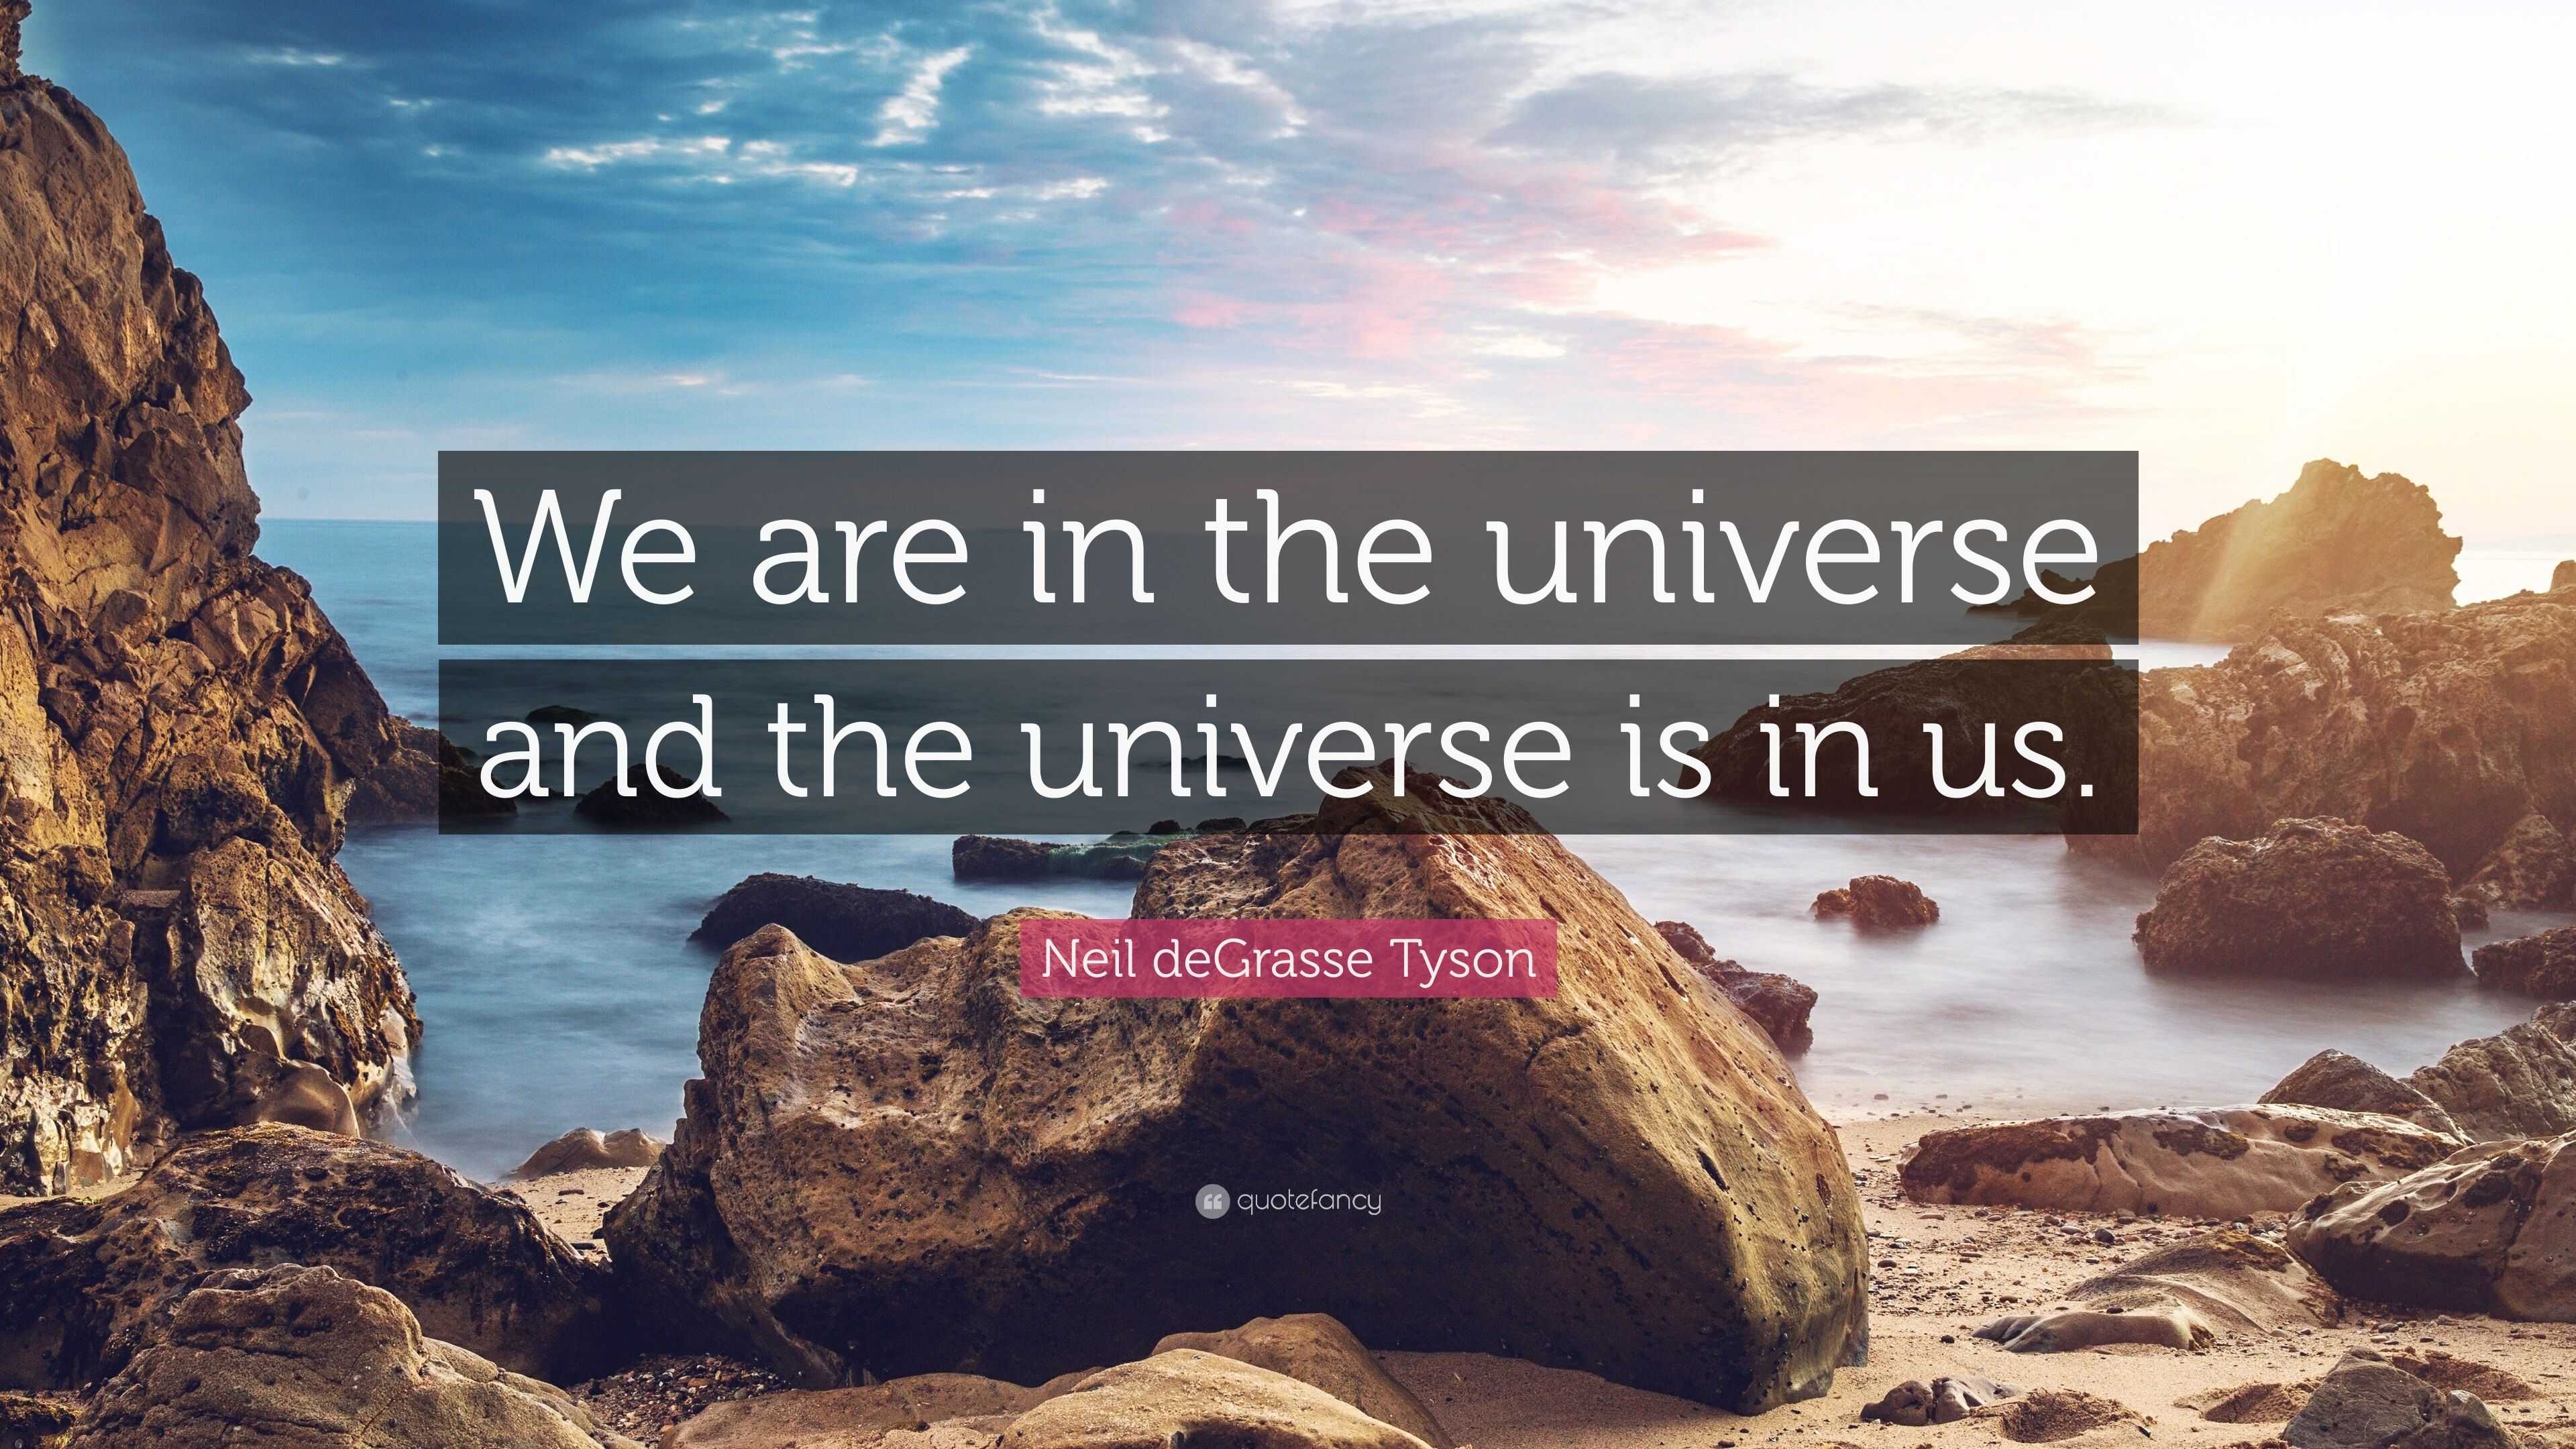 Neil deGrasse Tyson Quote: “We are in the universe and the universe is ...